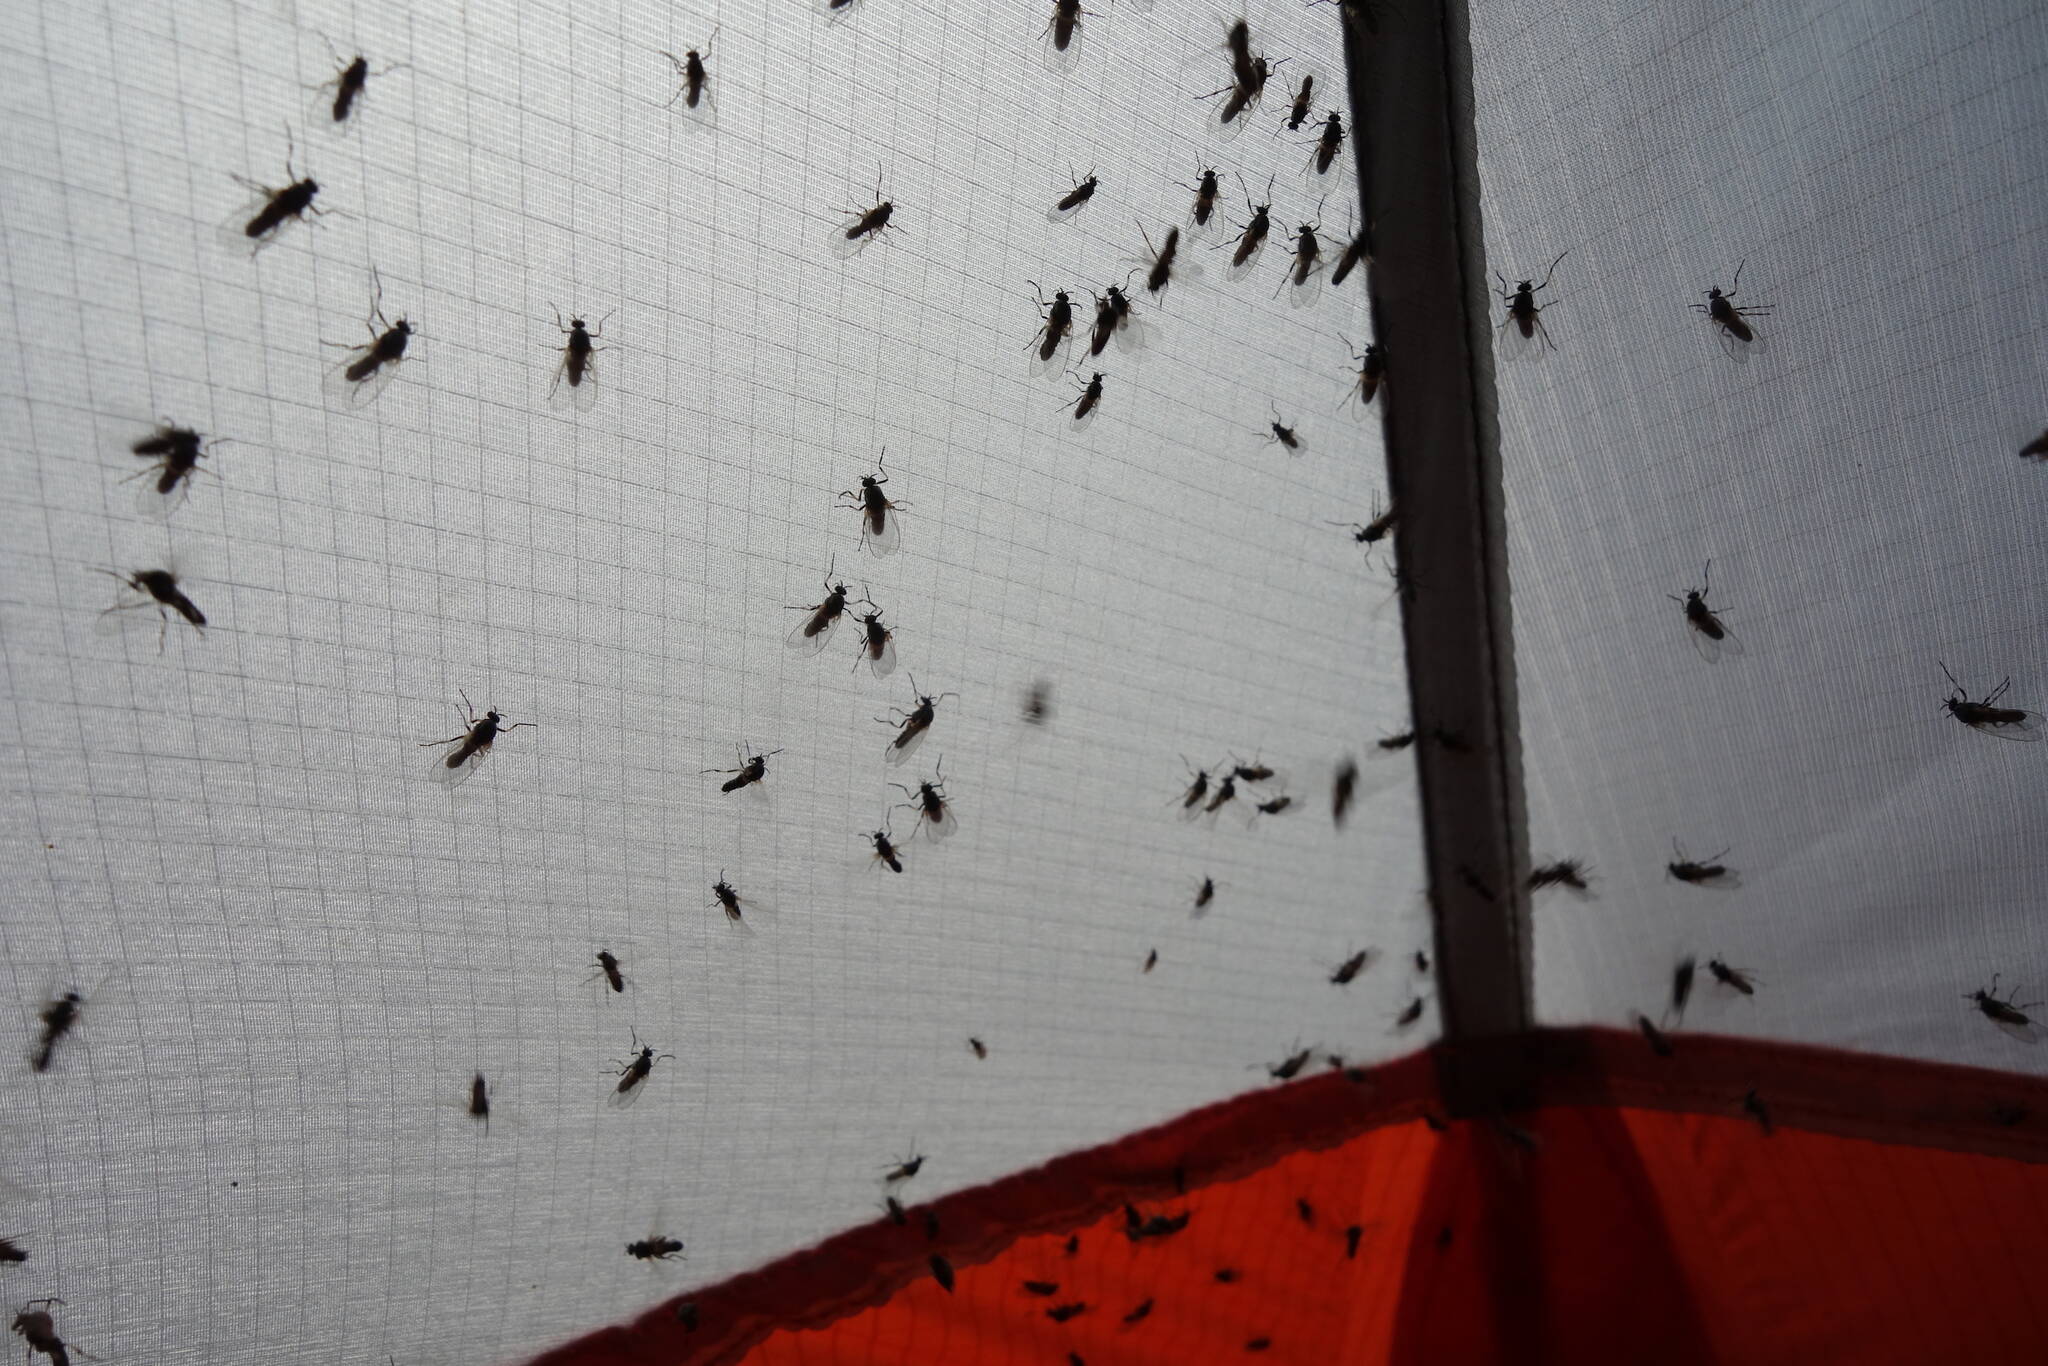 Insects like these flies clinging to a tent seem to be in ample supply in Alaska’s boreal forest. (Photo by Ned Rozell)